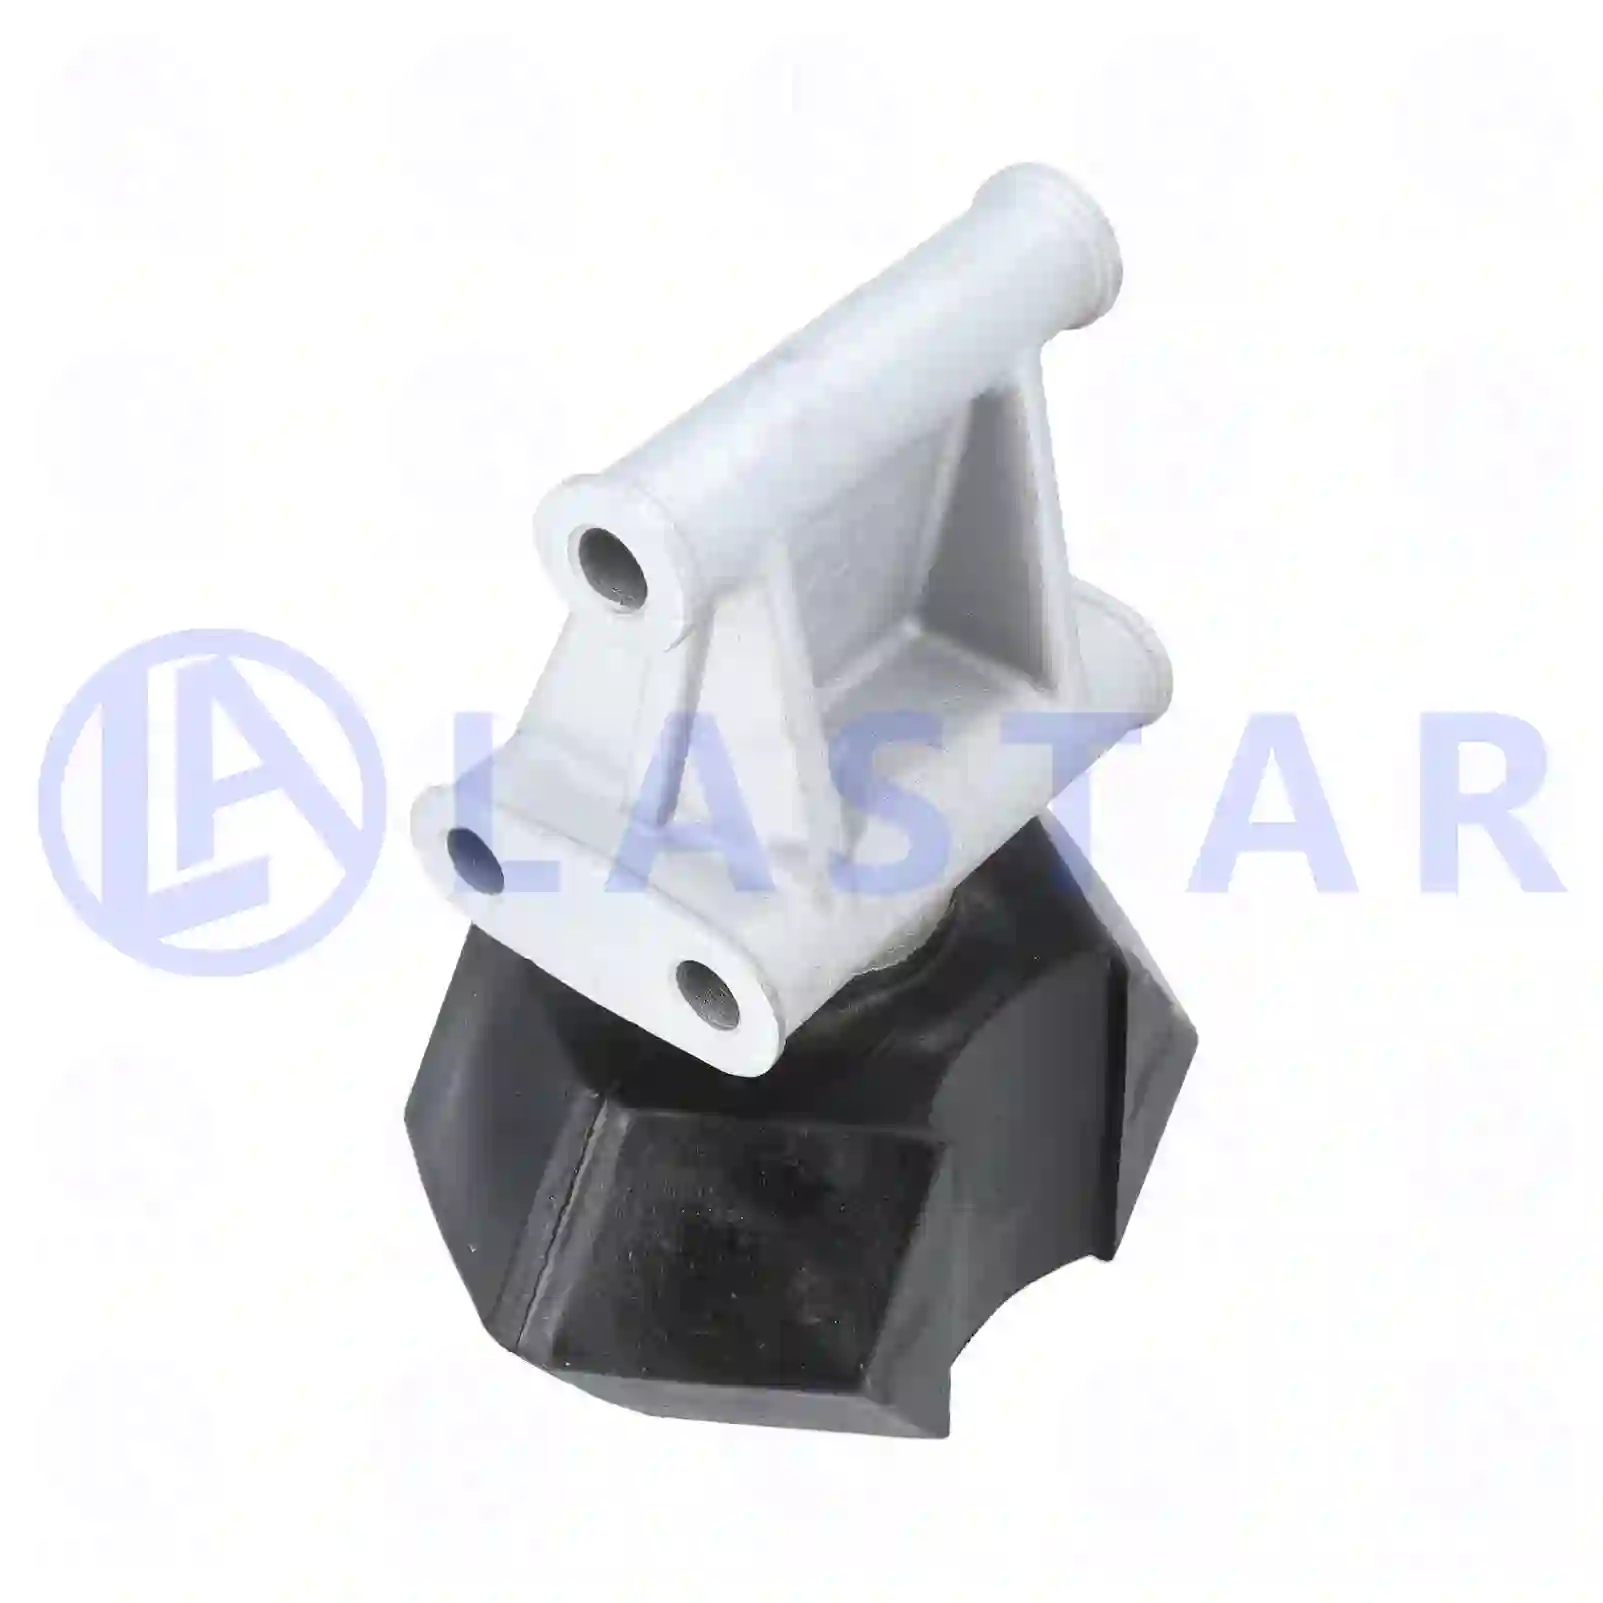 Engine mounting, 77700052, 1573891, 3036614, ZG01097-0008, , , ||  77700052 Lastar Spare Part | Truck Spare Parts, Auotomotive Spare Parts Engine mounting, 77700052, 1573891, 3036614, ZG01097-0008, , , ||  77700052 Lastar Spare Part | Truck Spare Parts, Auotomotive Spare Parts